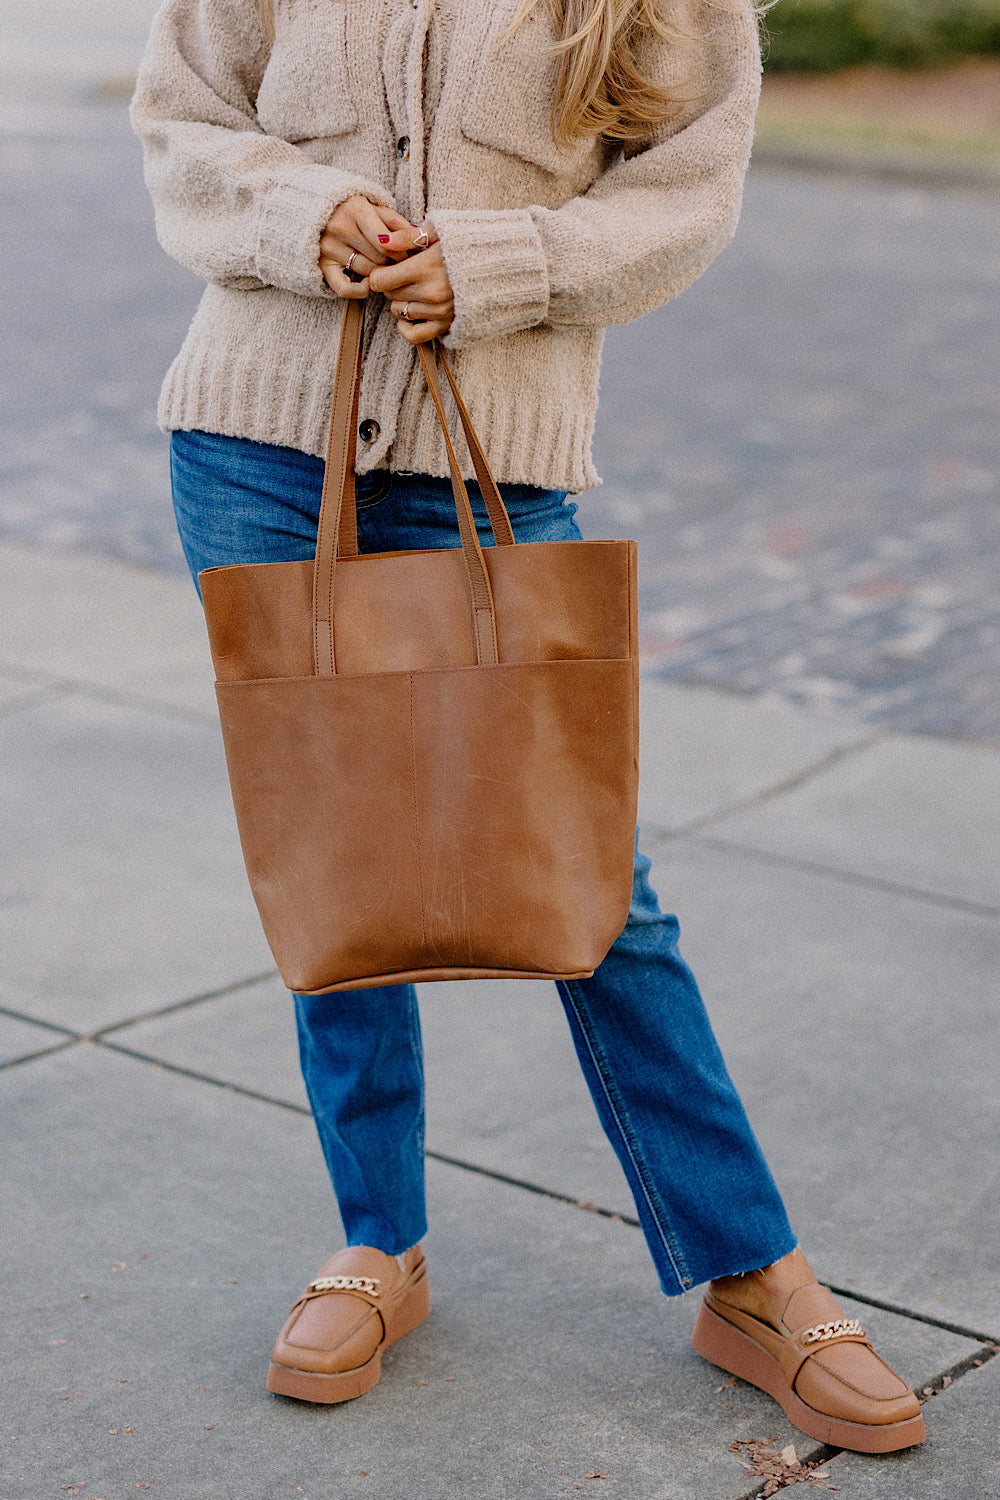 Selam Magazine Tote in Whiskey by ABLE at